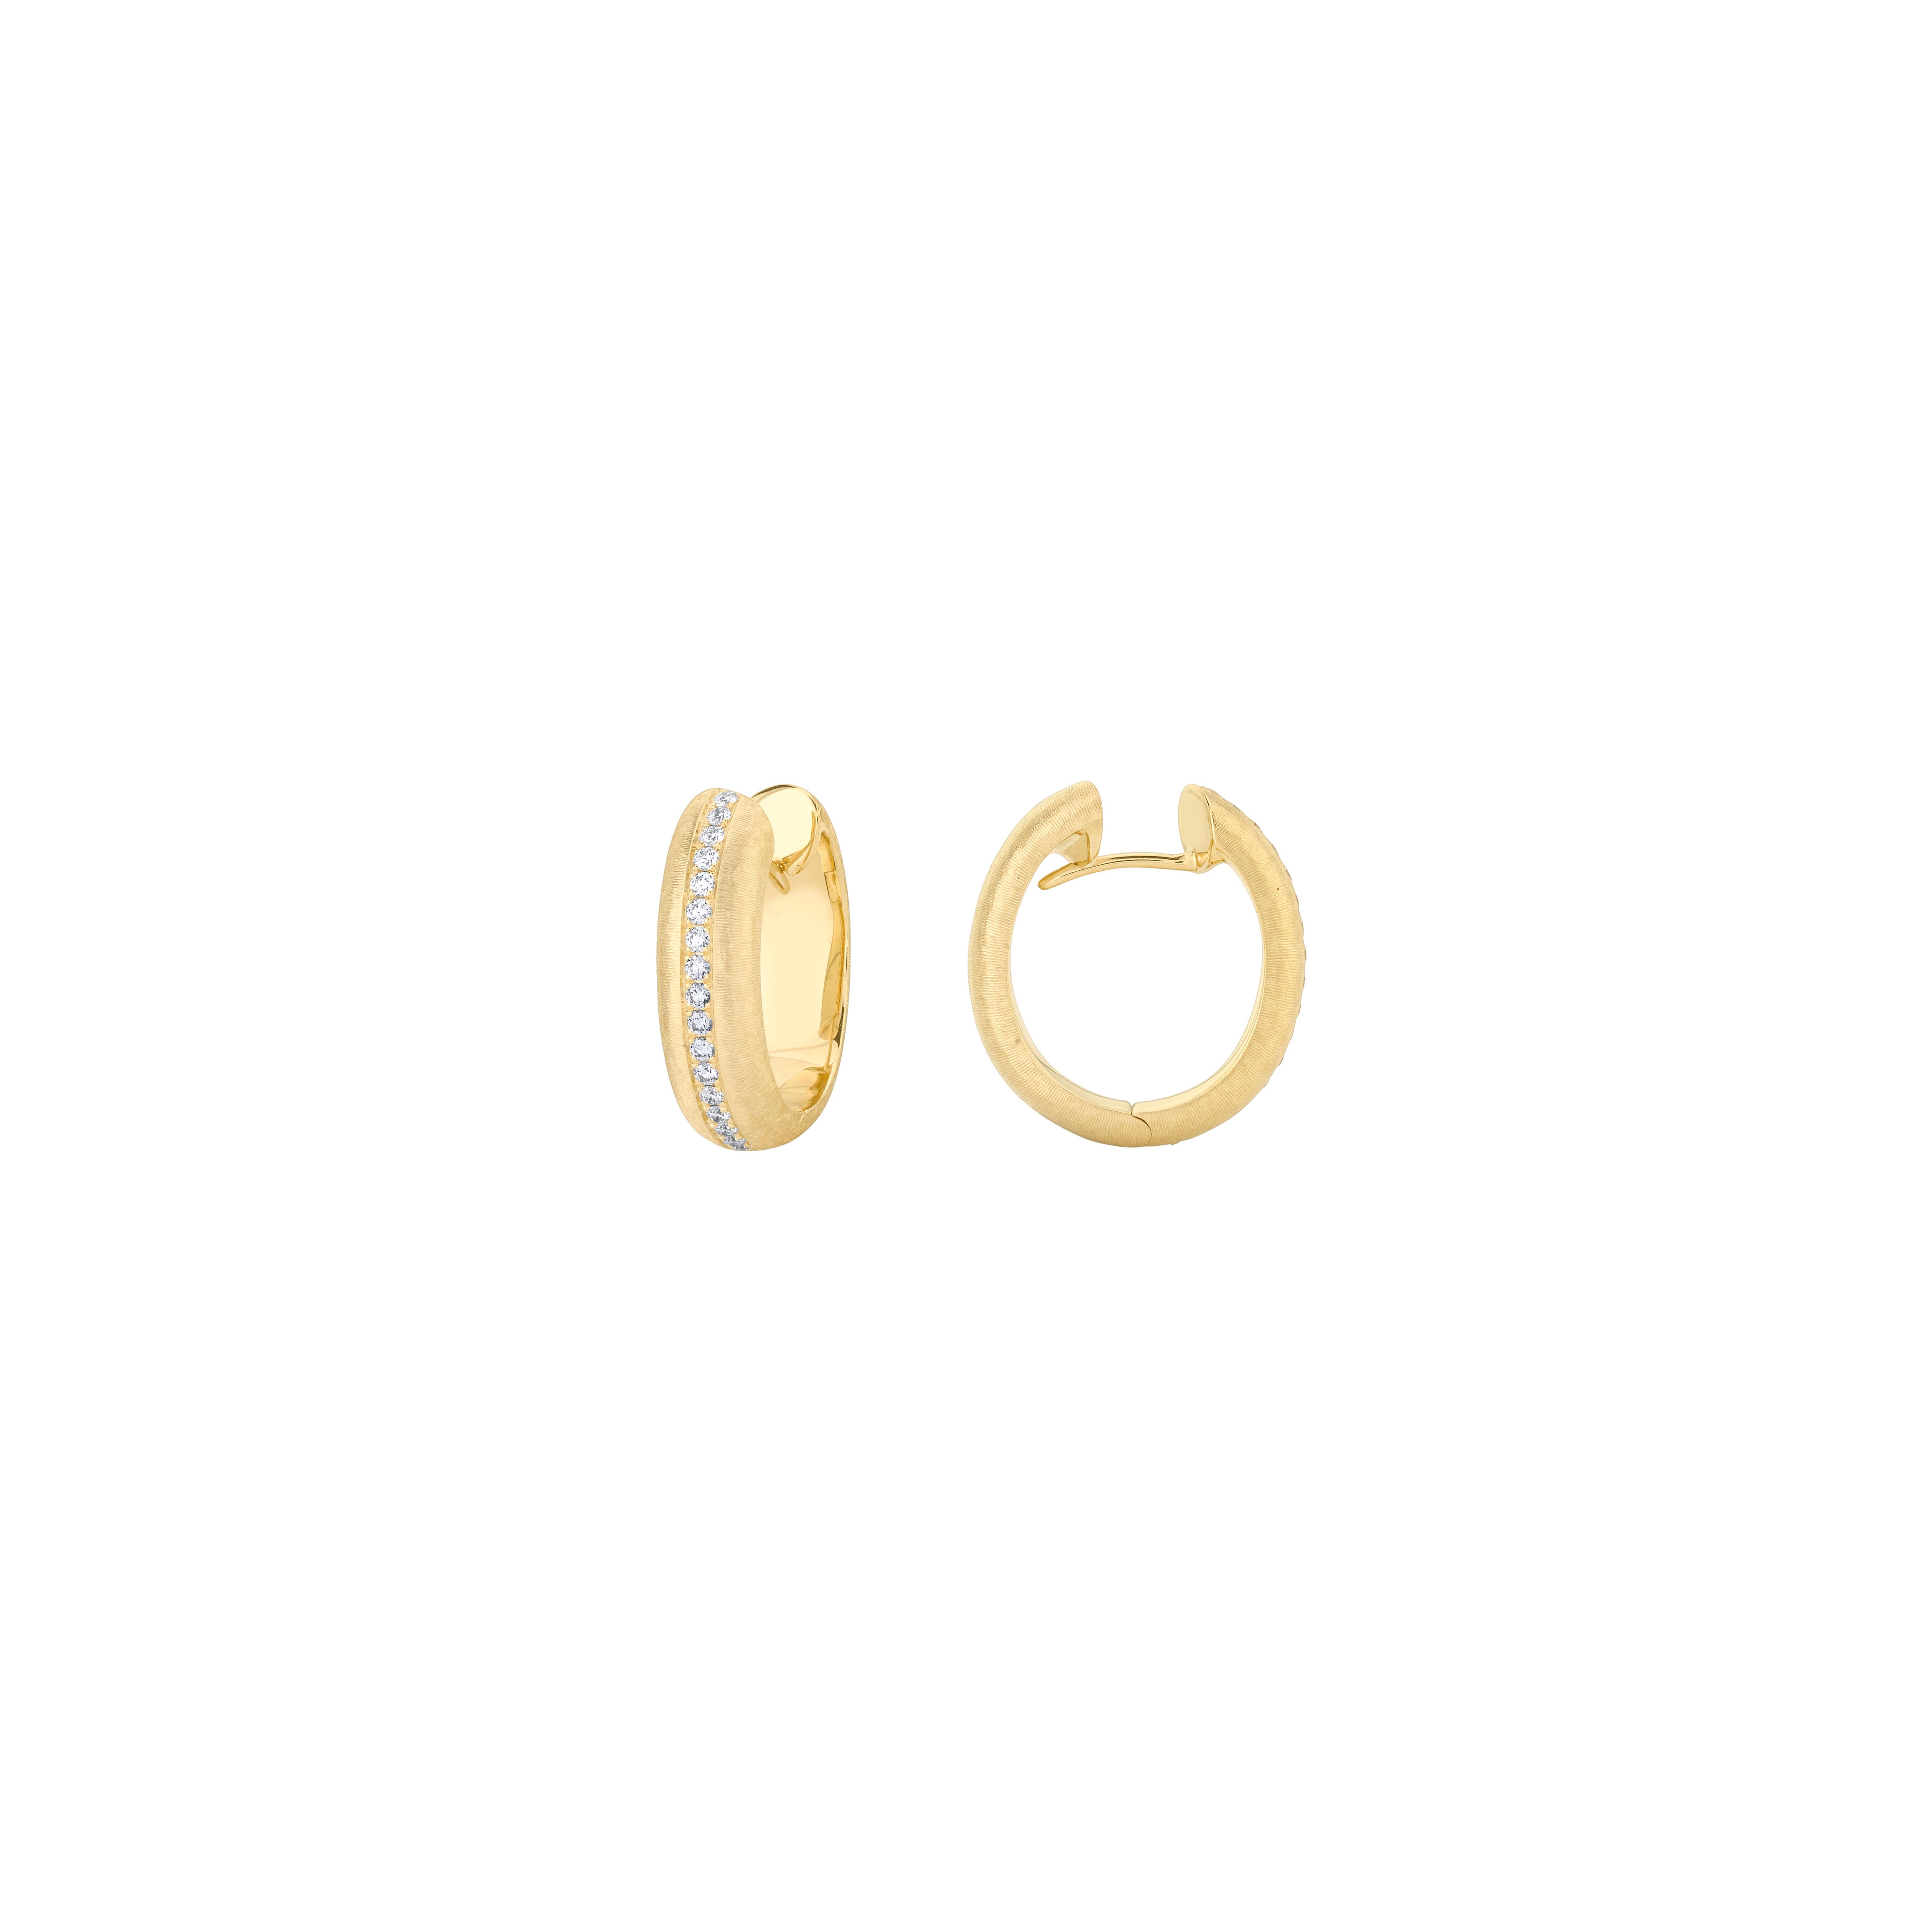 Style #: XH15E.
SYLVIA KONTENTE  18K Yellow gold diamond hoop earrings with hand-engraved finish.
Precision-cut, round brilliant diamonds.
Diamond total weight: 0.31ct tw.
Diamond color/clarity: DEF/VVS VS.
Hand-engraved finish - The ancient art of